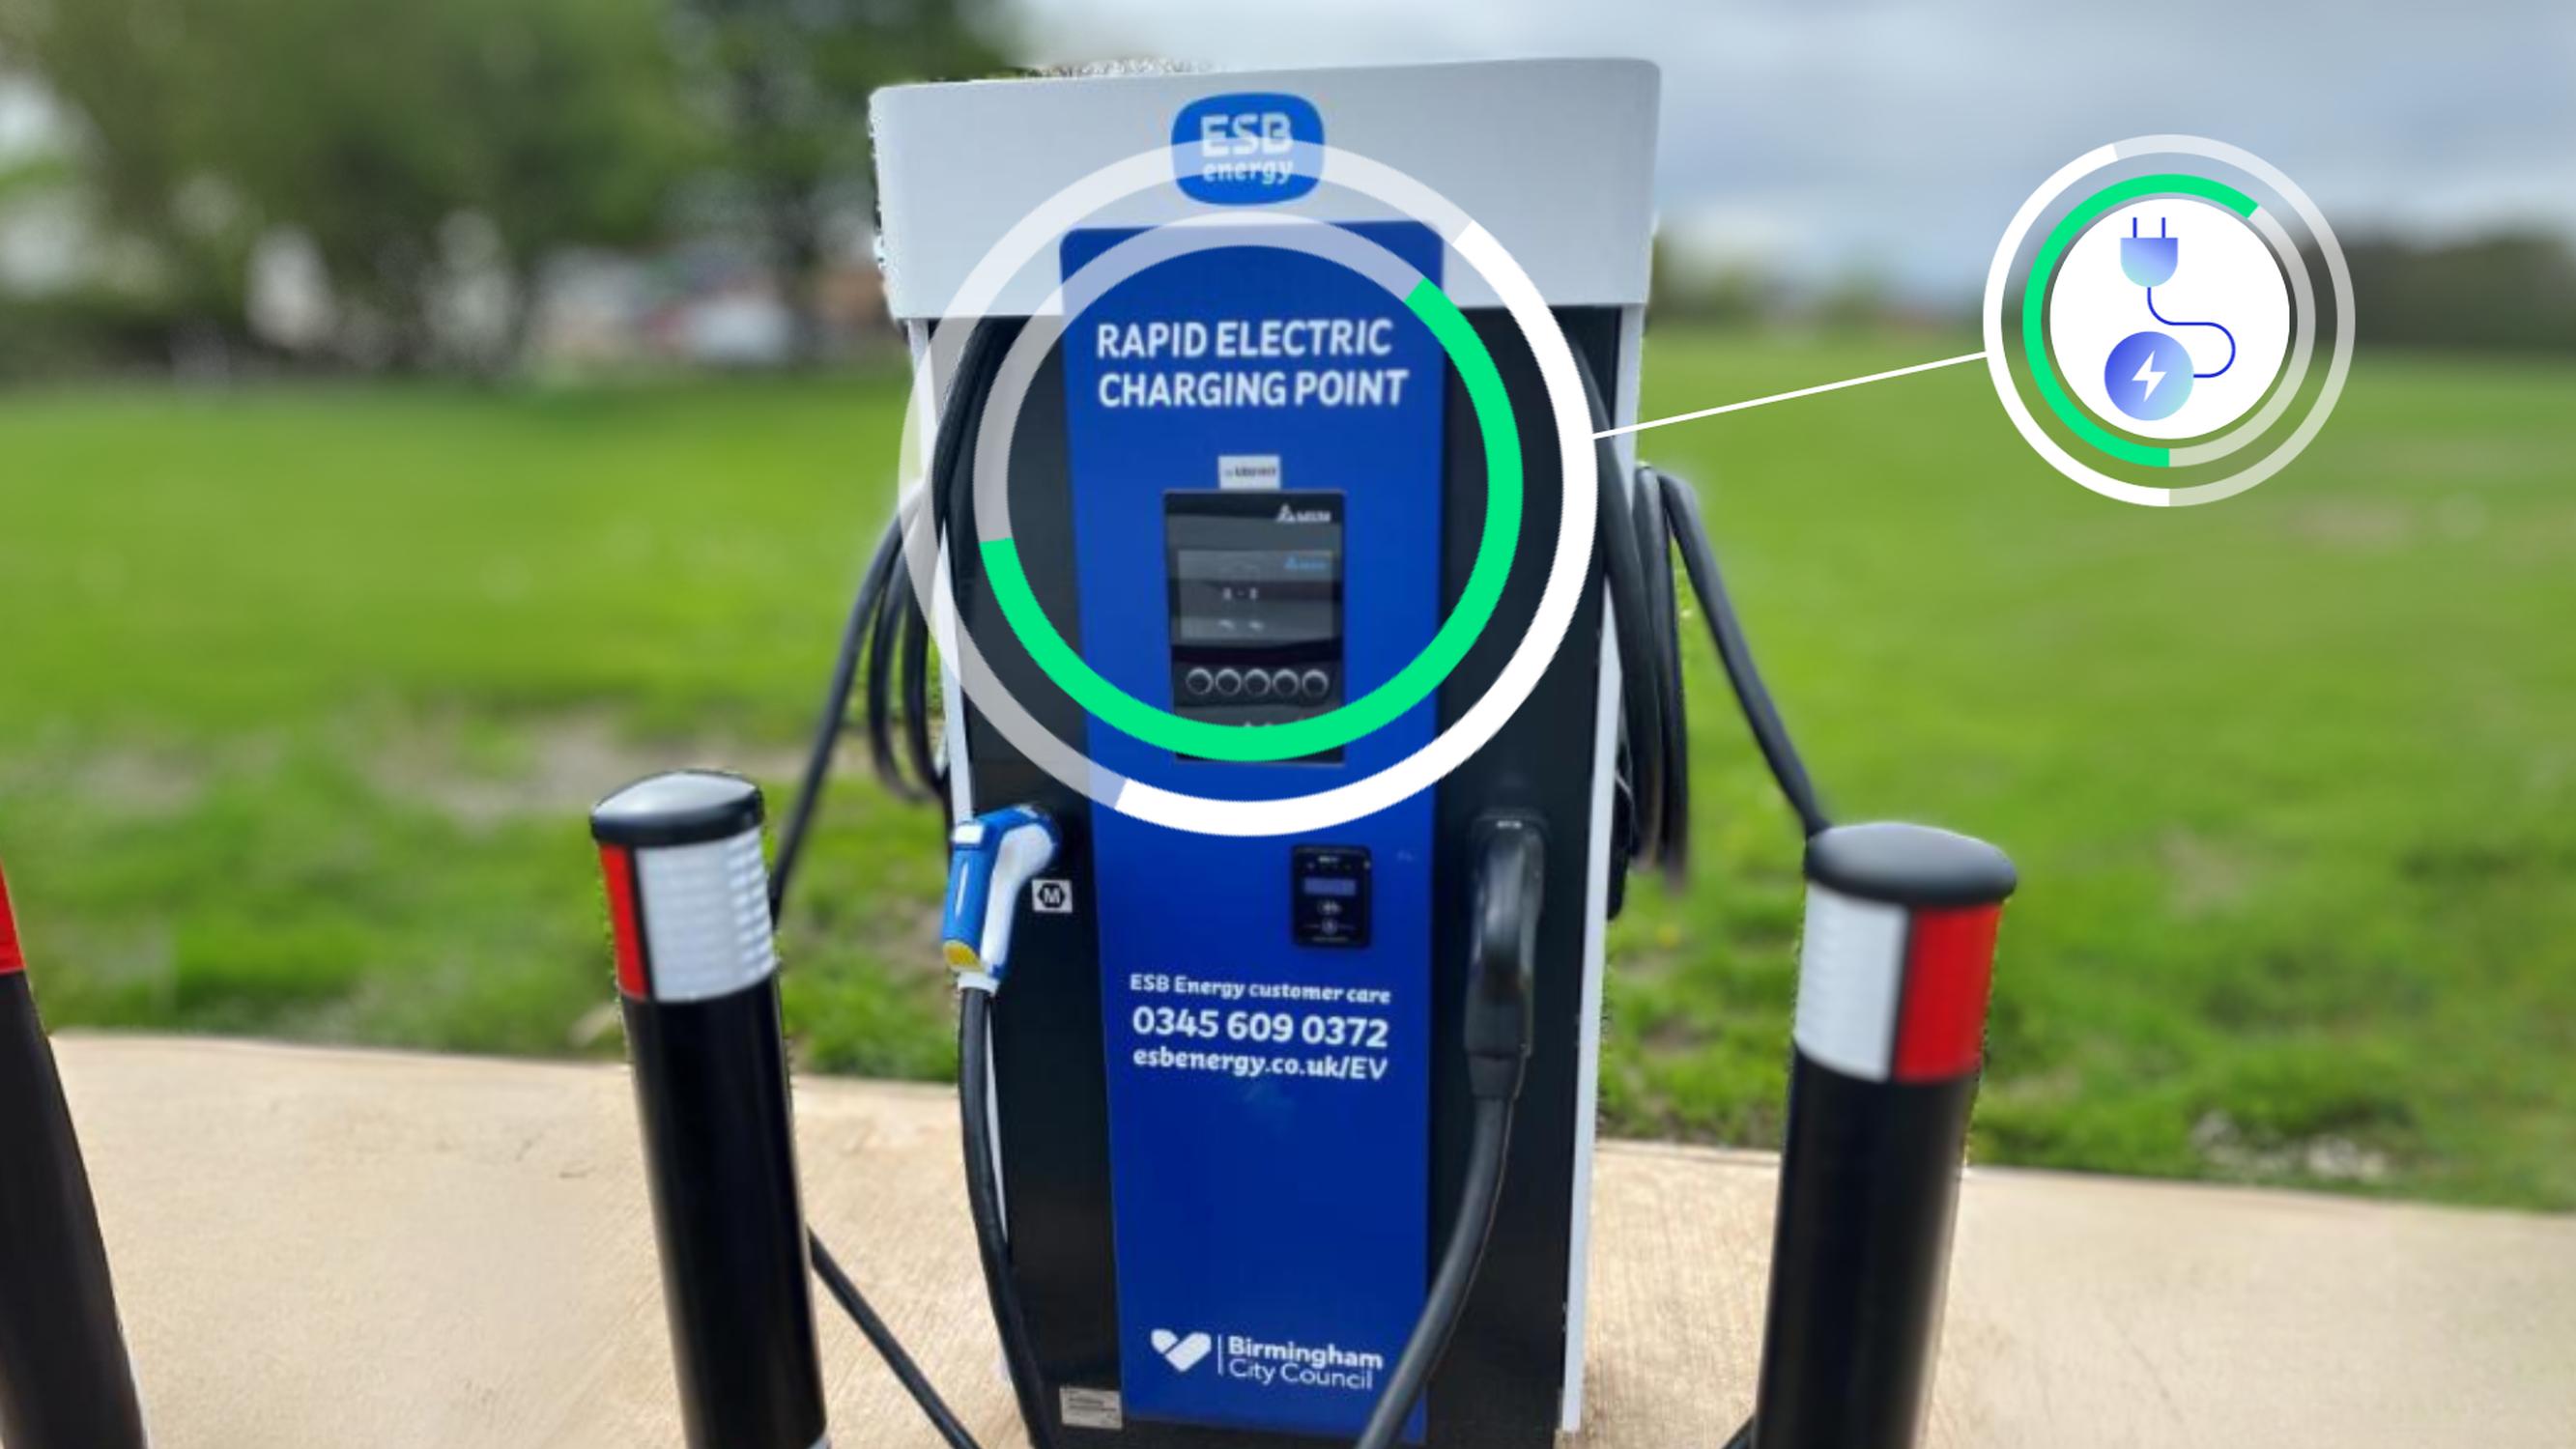 Yunex is maintaining chargers across Birmingham for ESB Energy